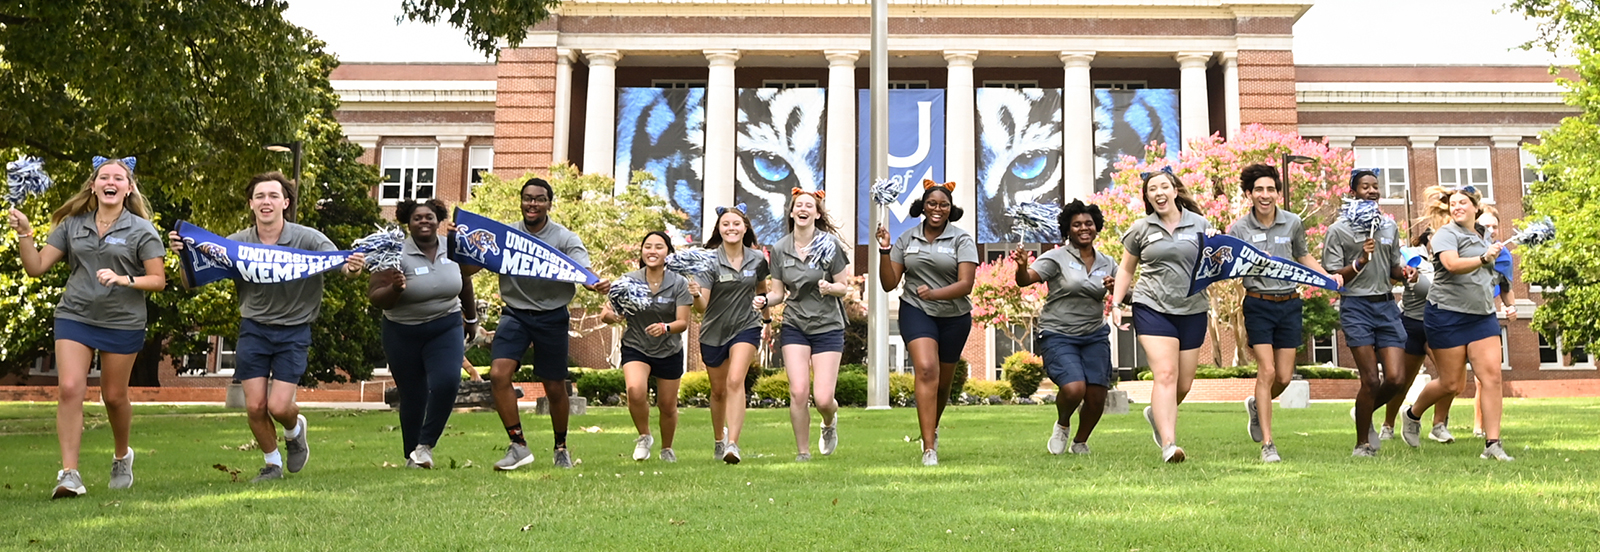 orientation guides running towards camera with excitement